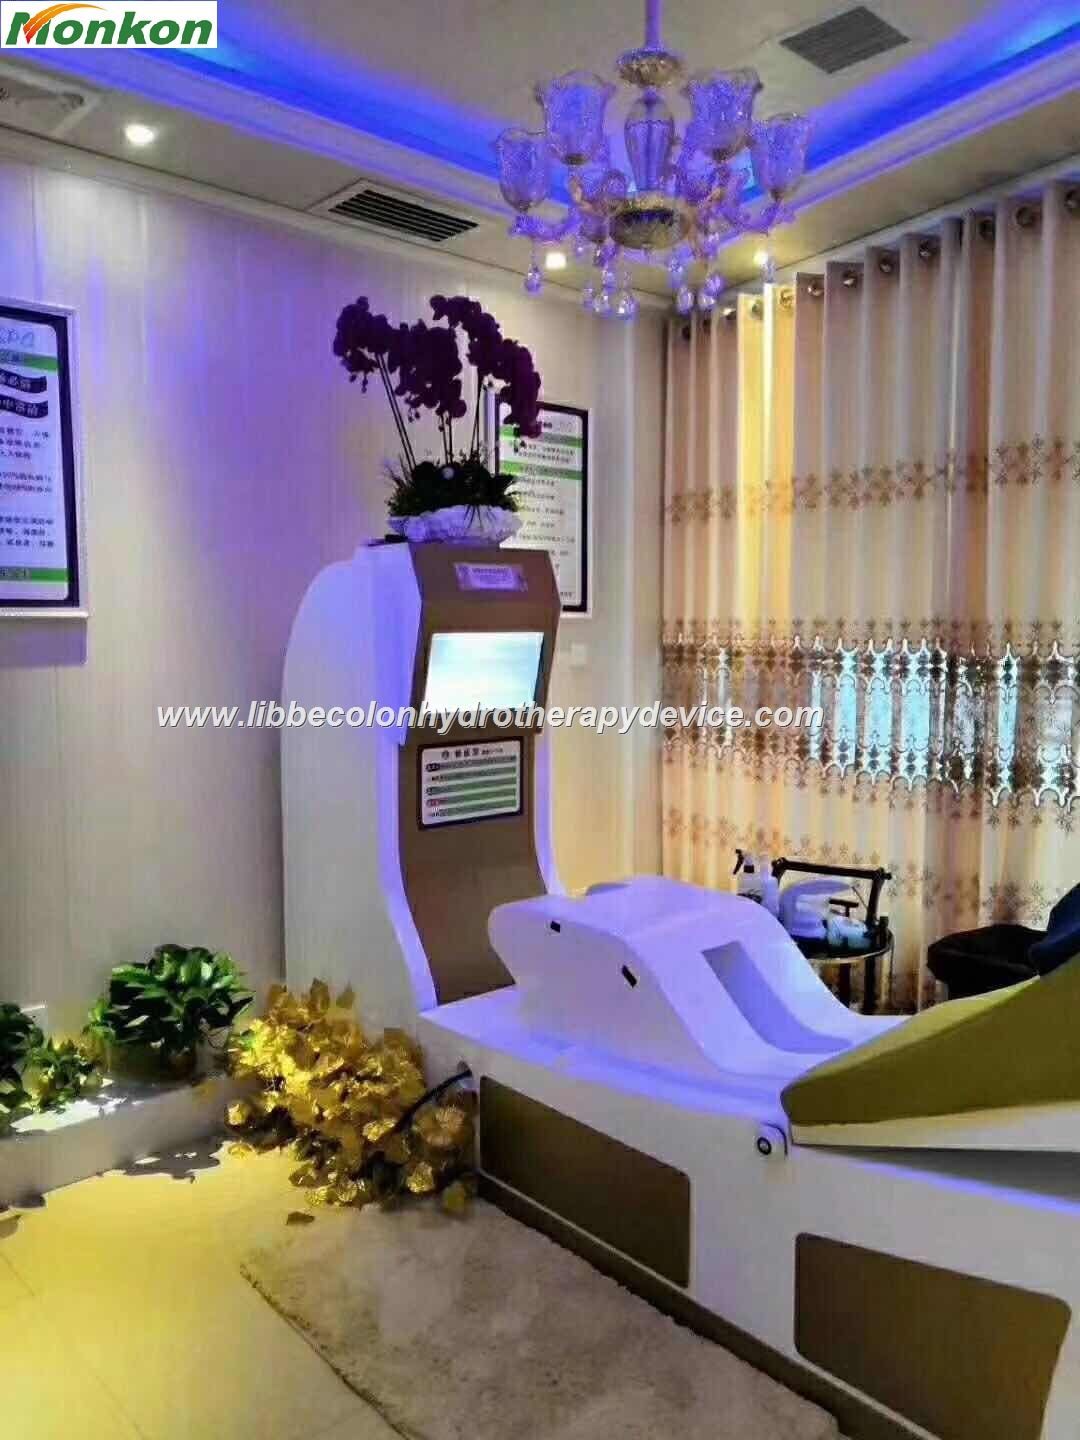 Colon Hydrotherapy سامان جي قيمت